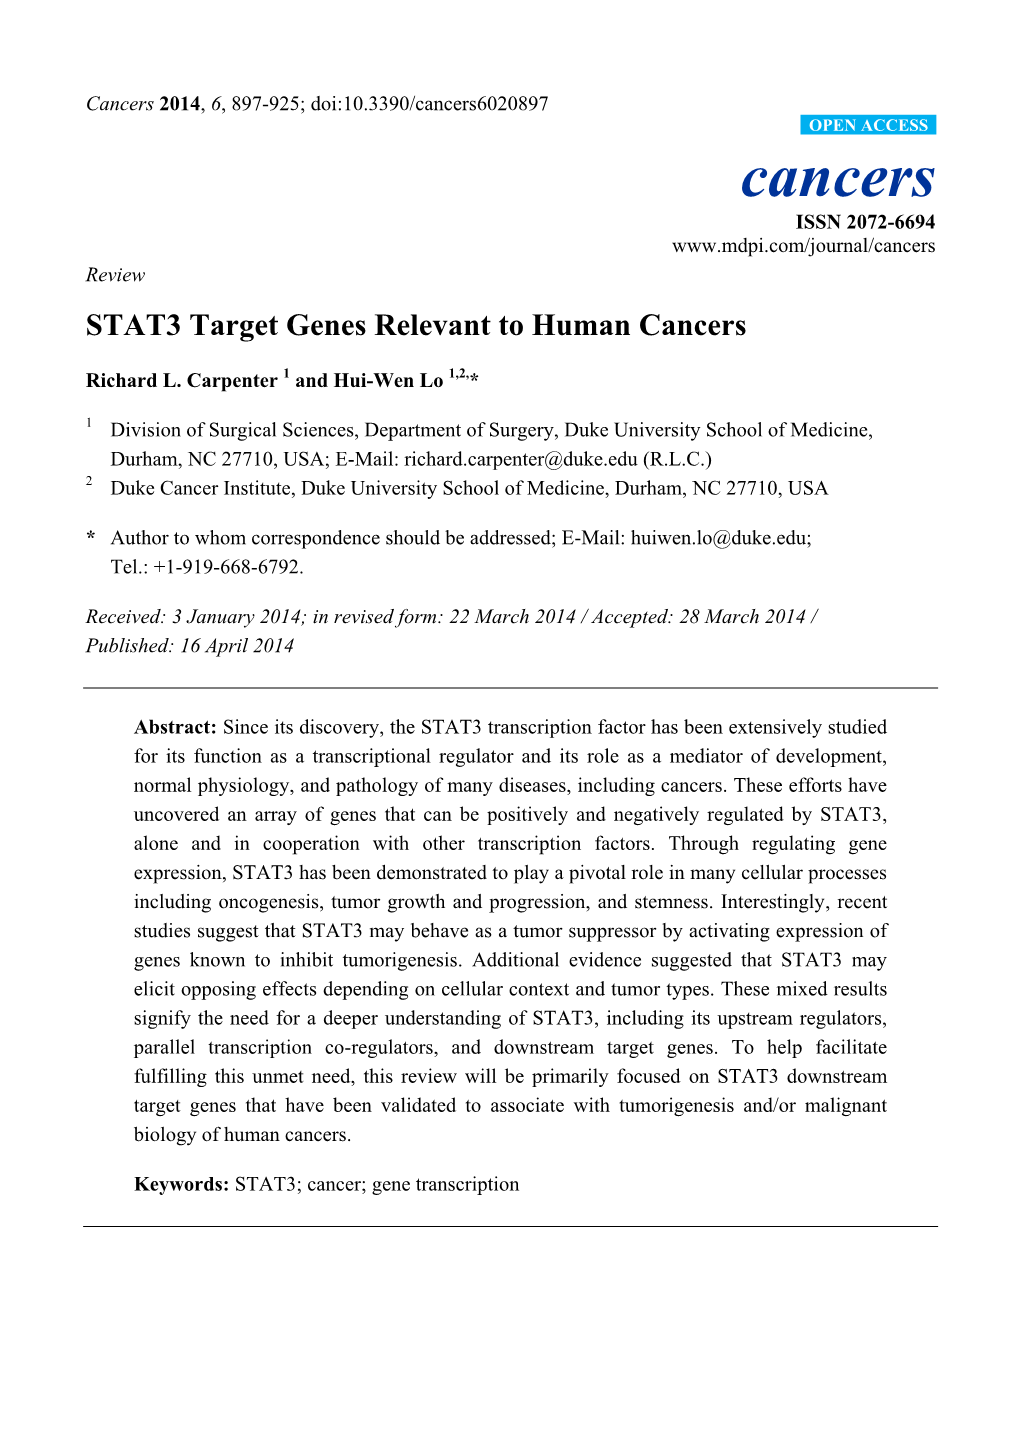 STAT3 Target Genes Relevant to Human Cancers